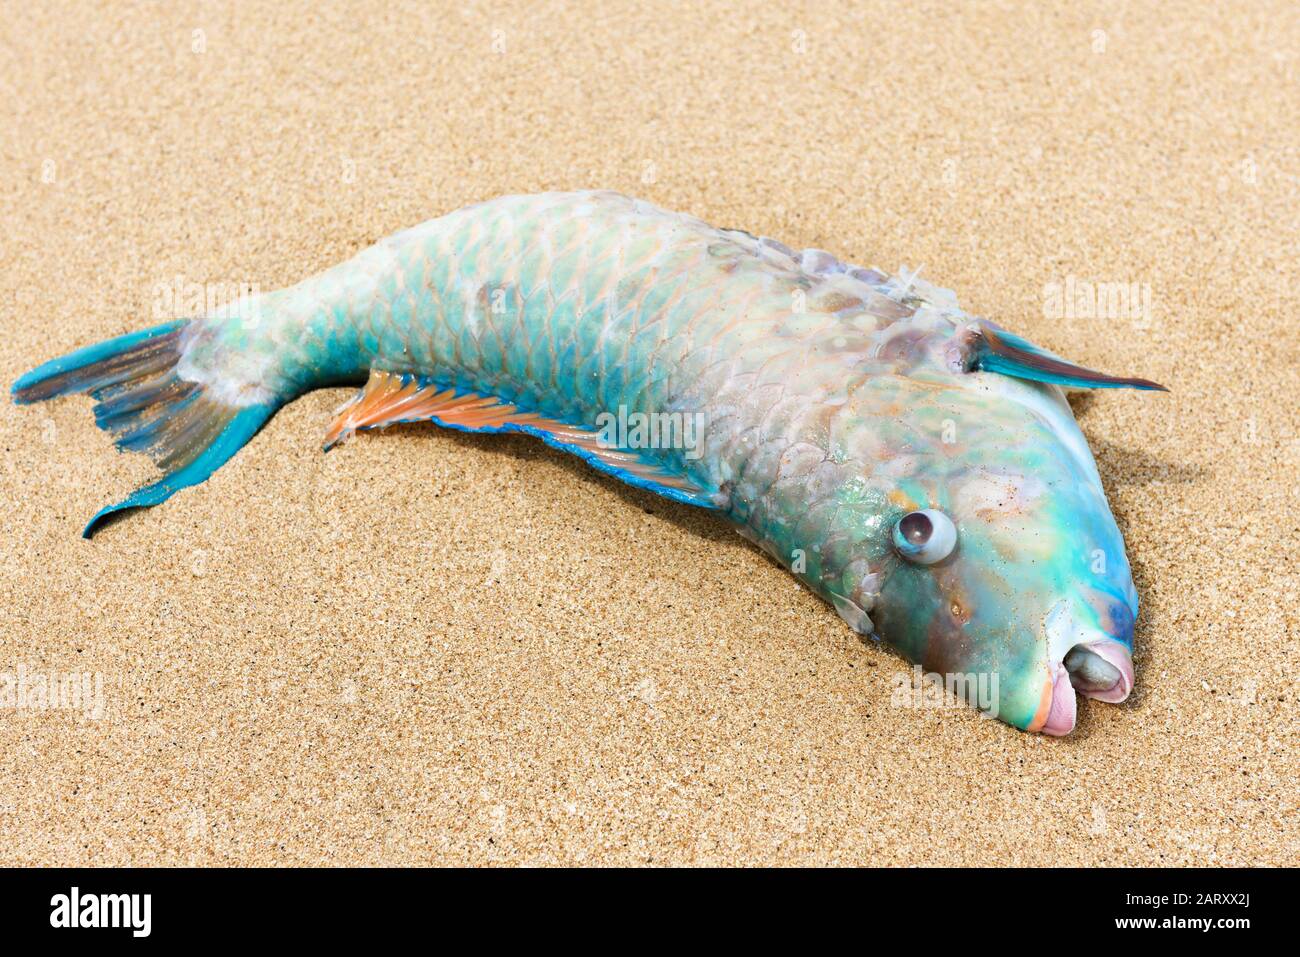 Fish on a sandy beach. Dead colorful fish on a tropical shore. Beautiful marine animal close-up. Concept of fishing or ocean pollution. Stock Photo